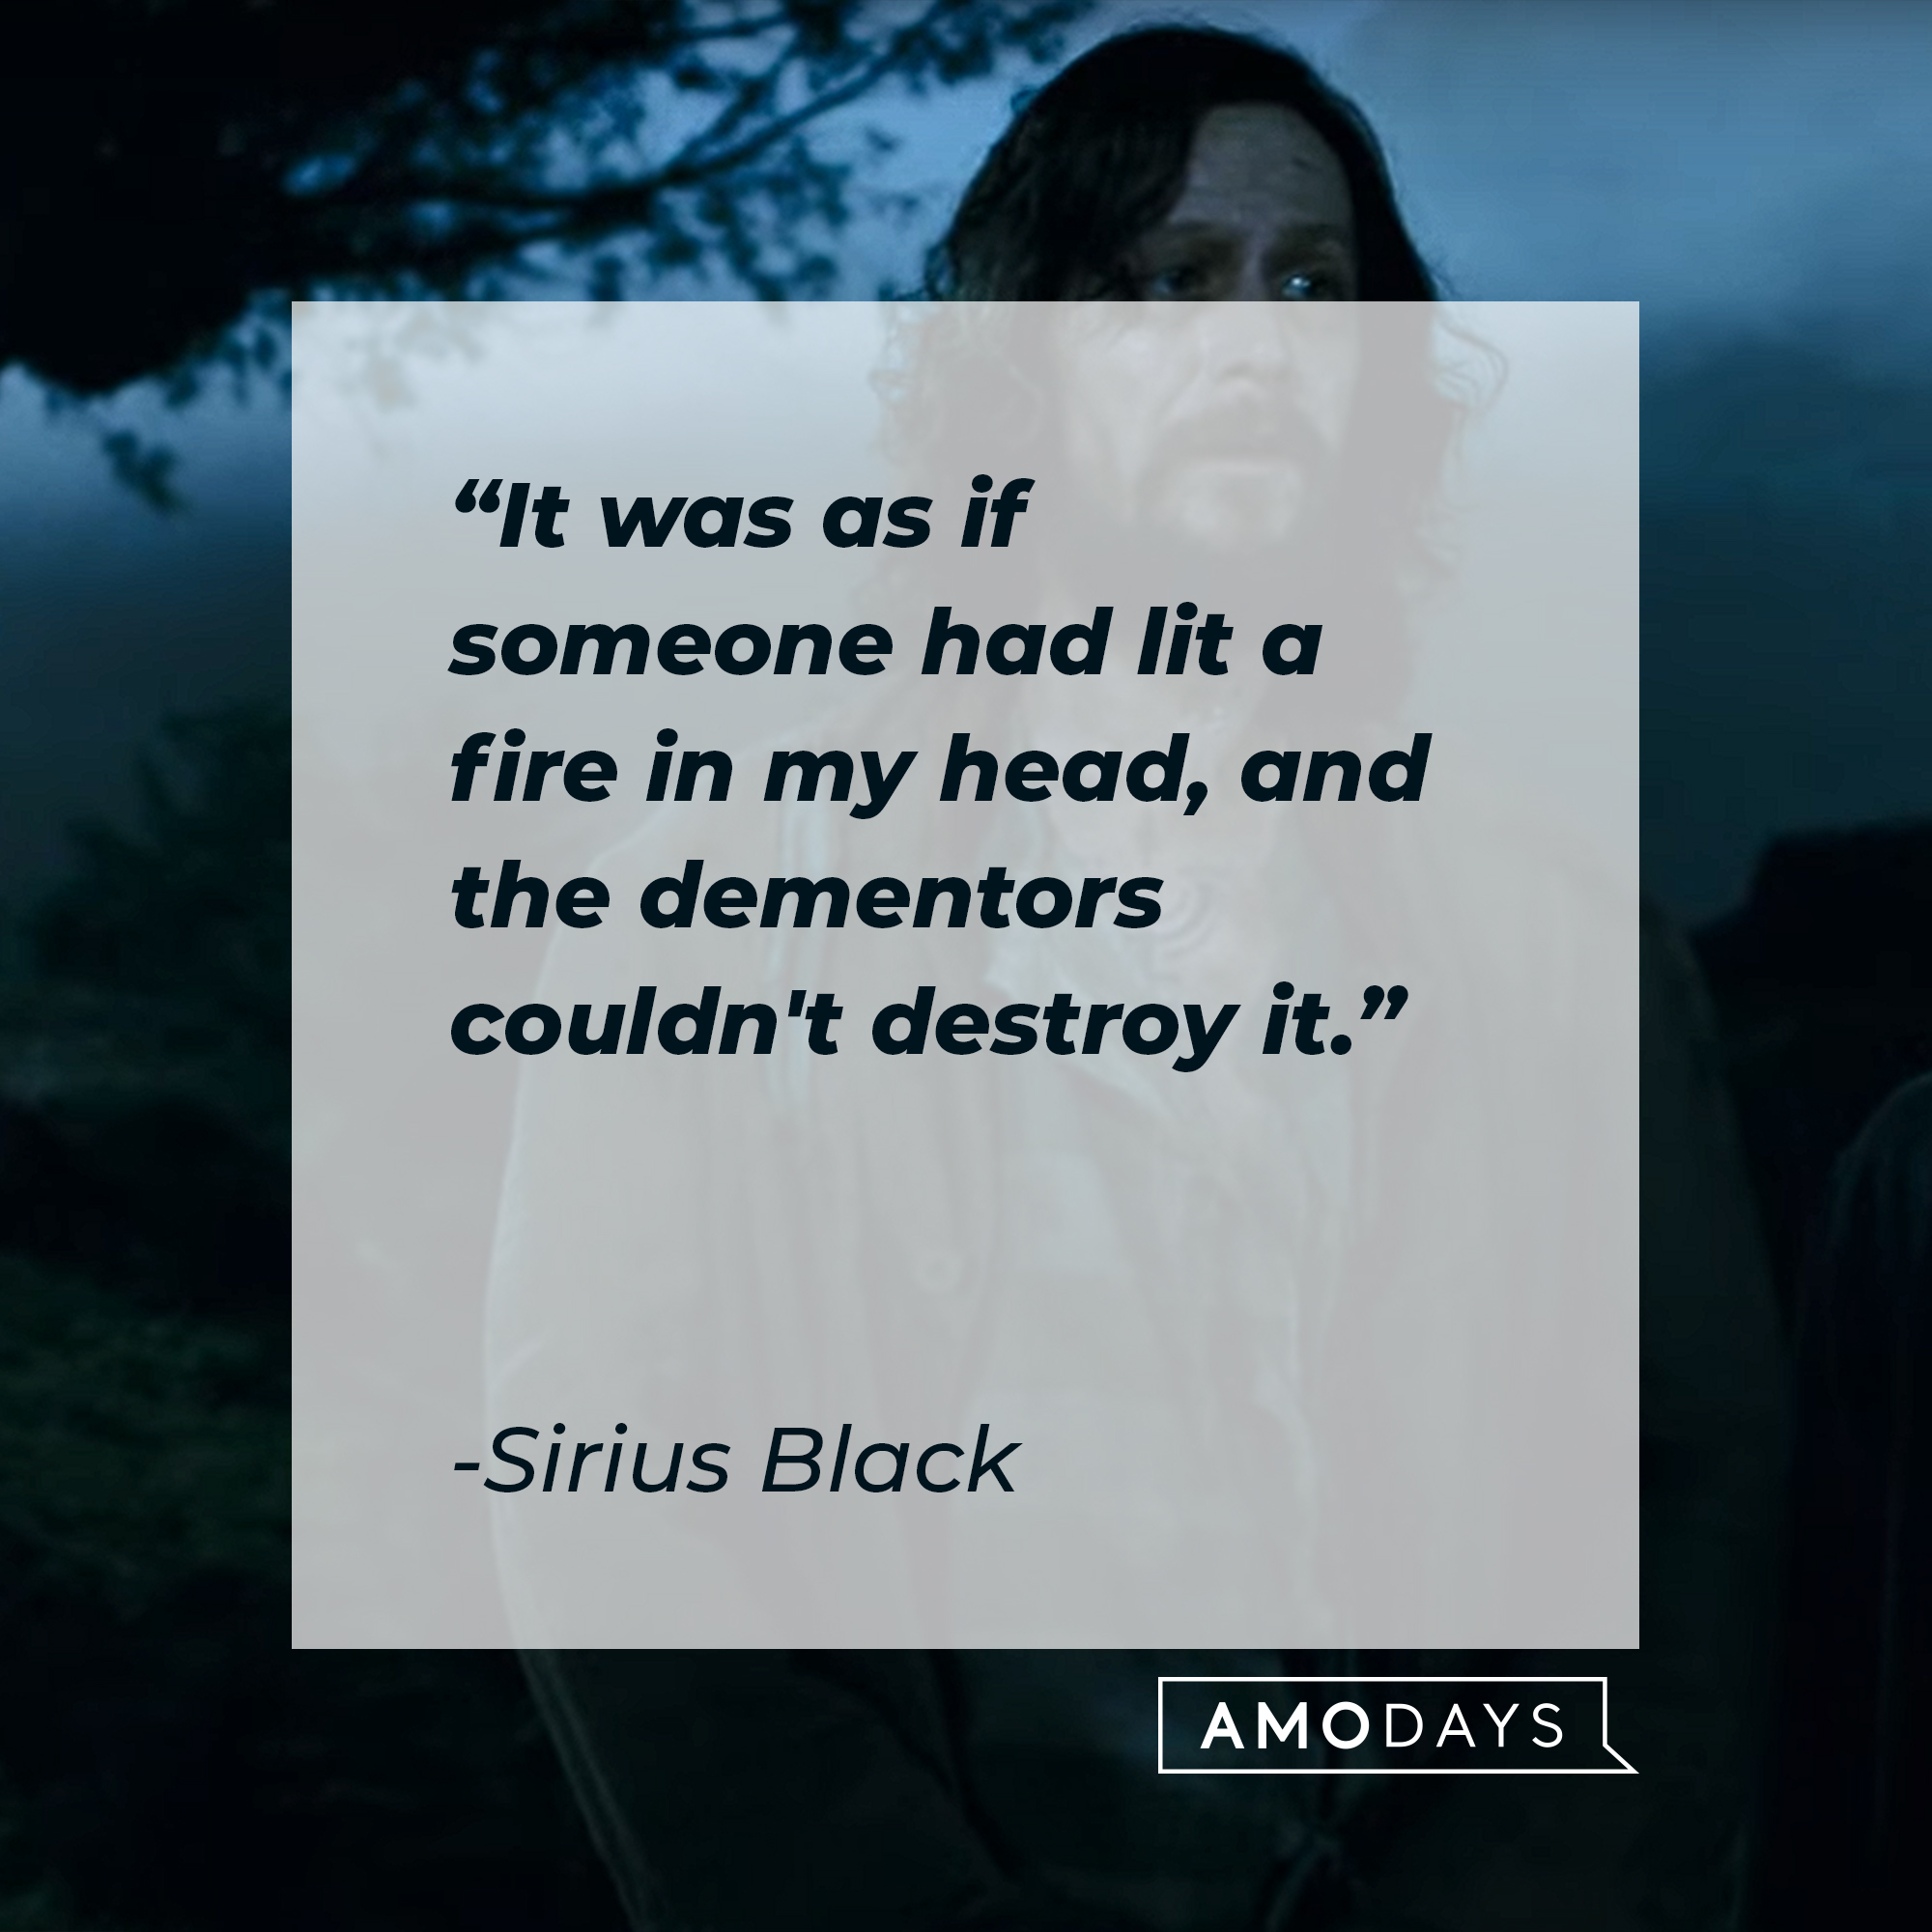 Sirius Black's quote: "It was as if someone had lit a fire in my head, and the dementors couldn't destroy it." | Source: YouTube/harrypotter